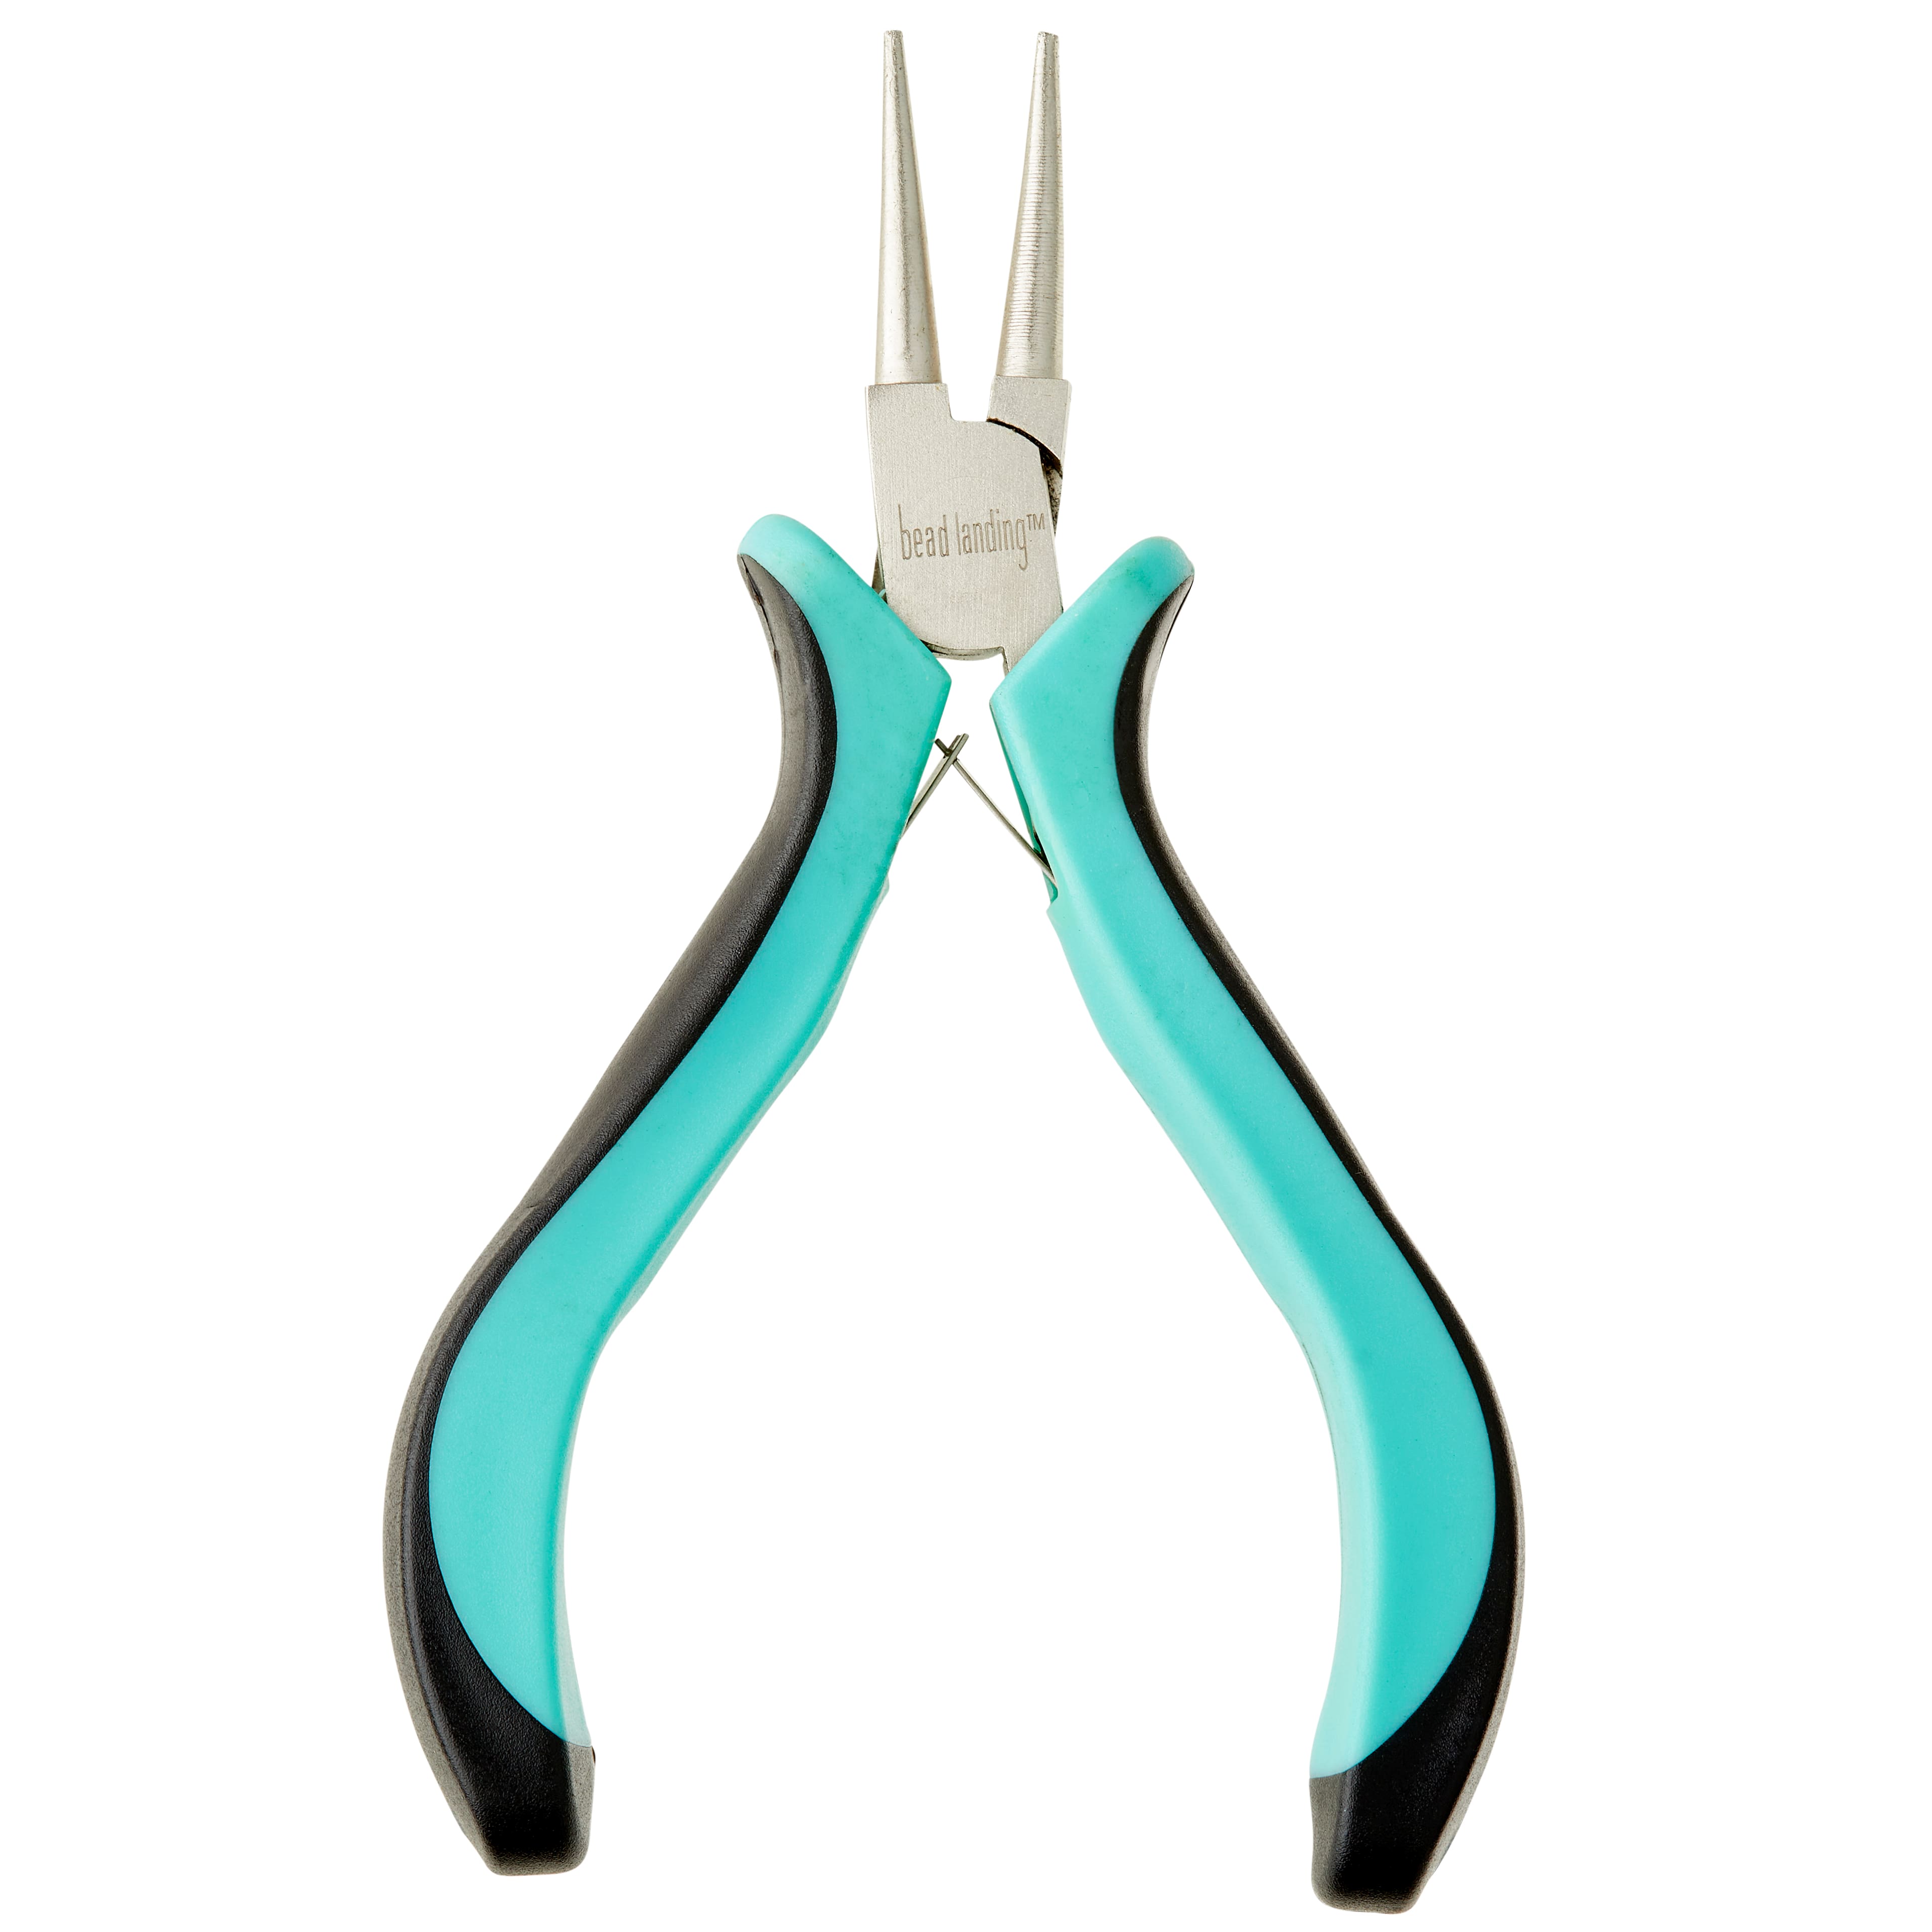 ROUND NOSE PLIERS WIRE WORK JEWELRY MAKING PLIERS 5 HOBBY